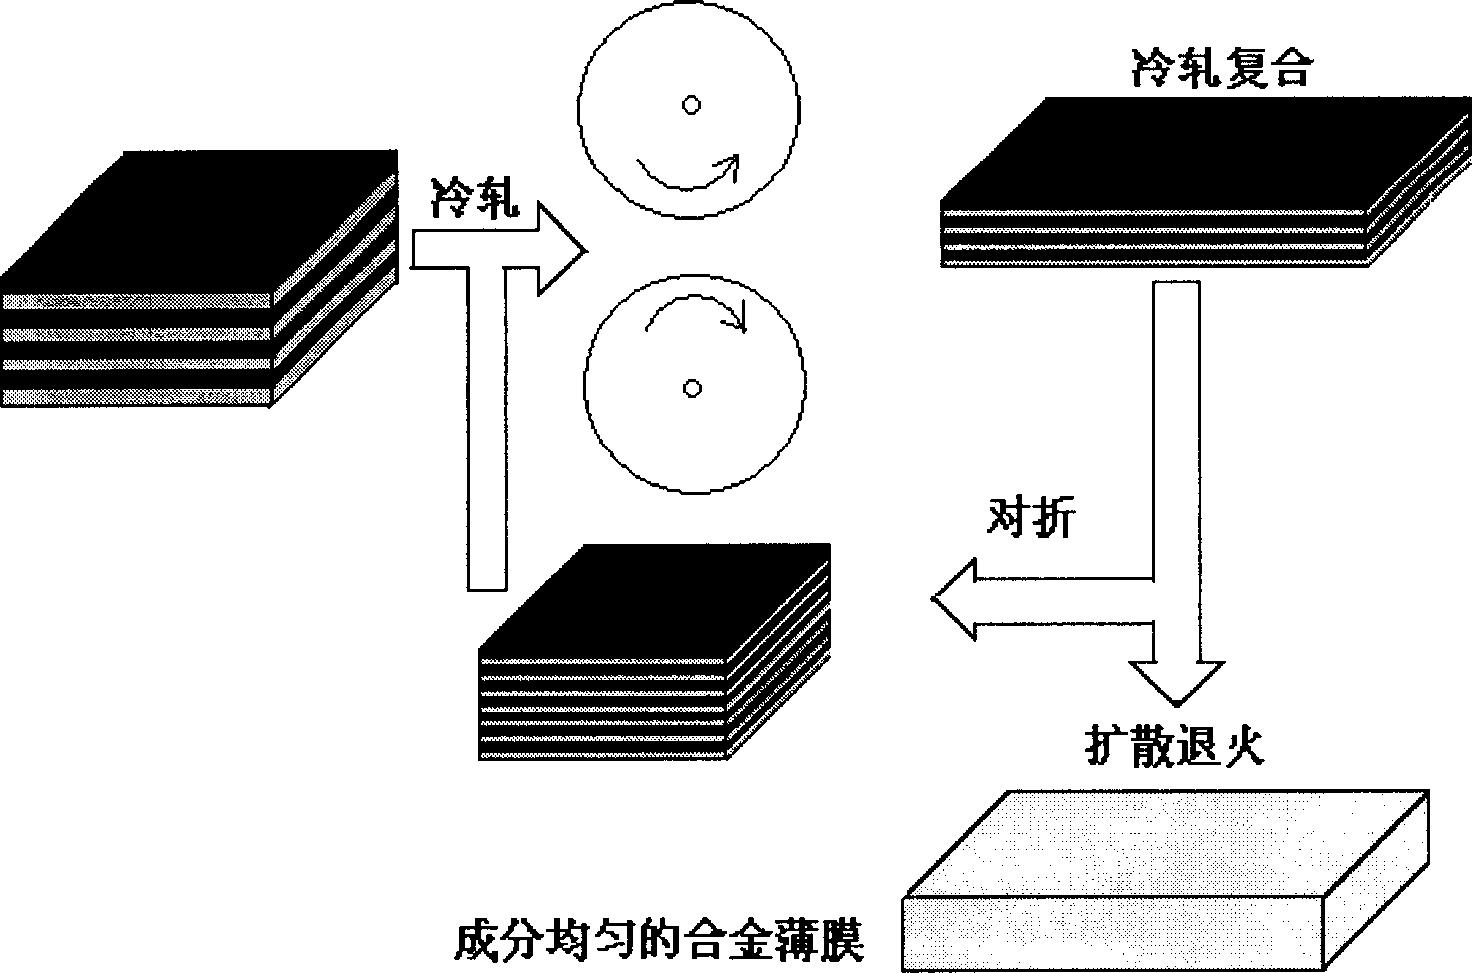 Method for preparing NiAl shape memory alloy film by cold rolling ultra-thin laminated alloy foil